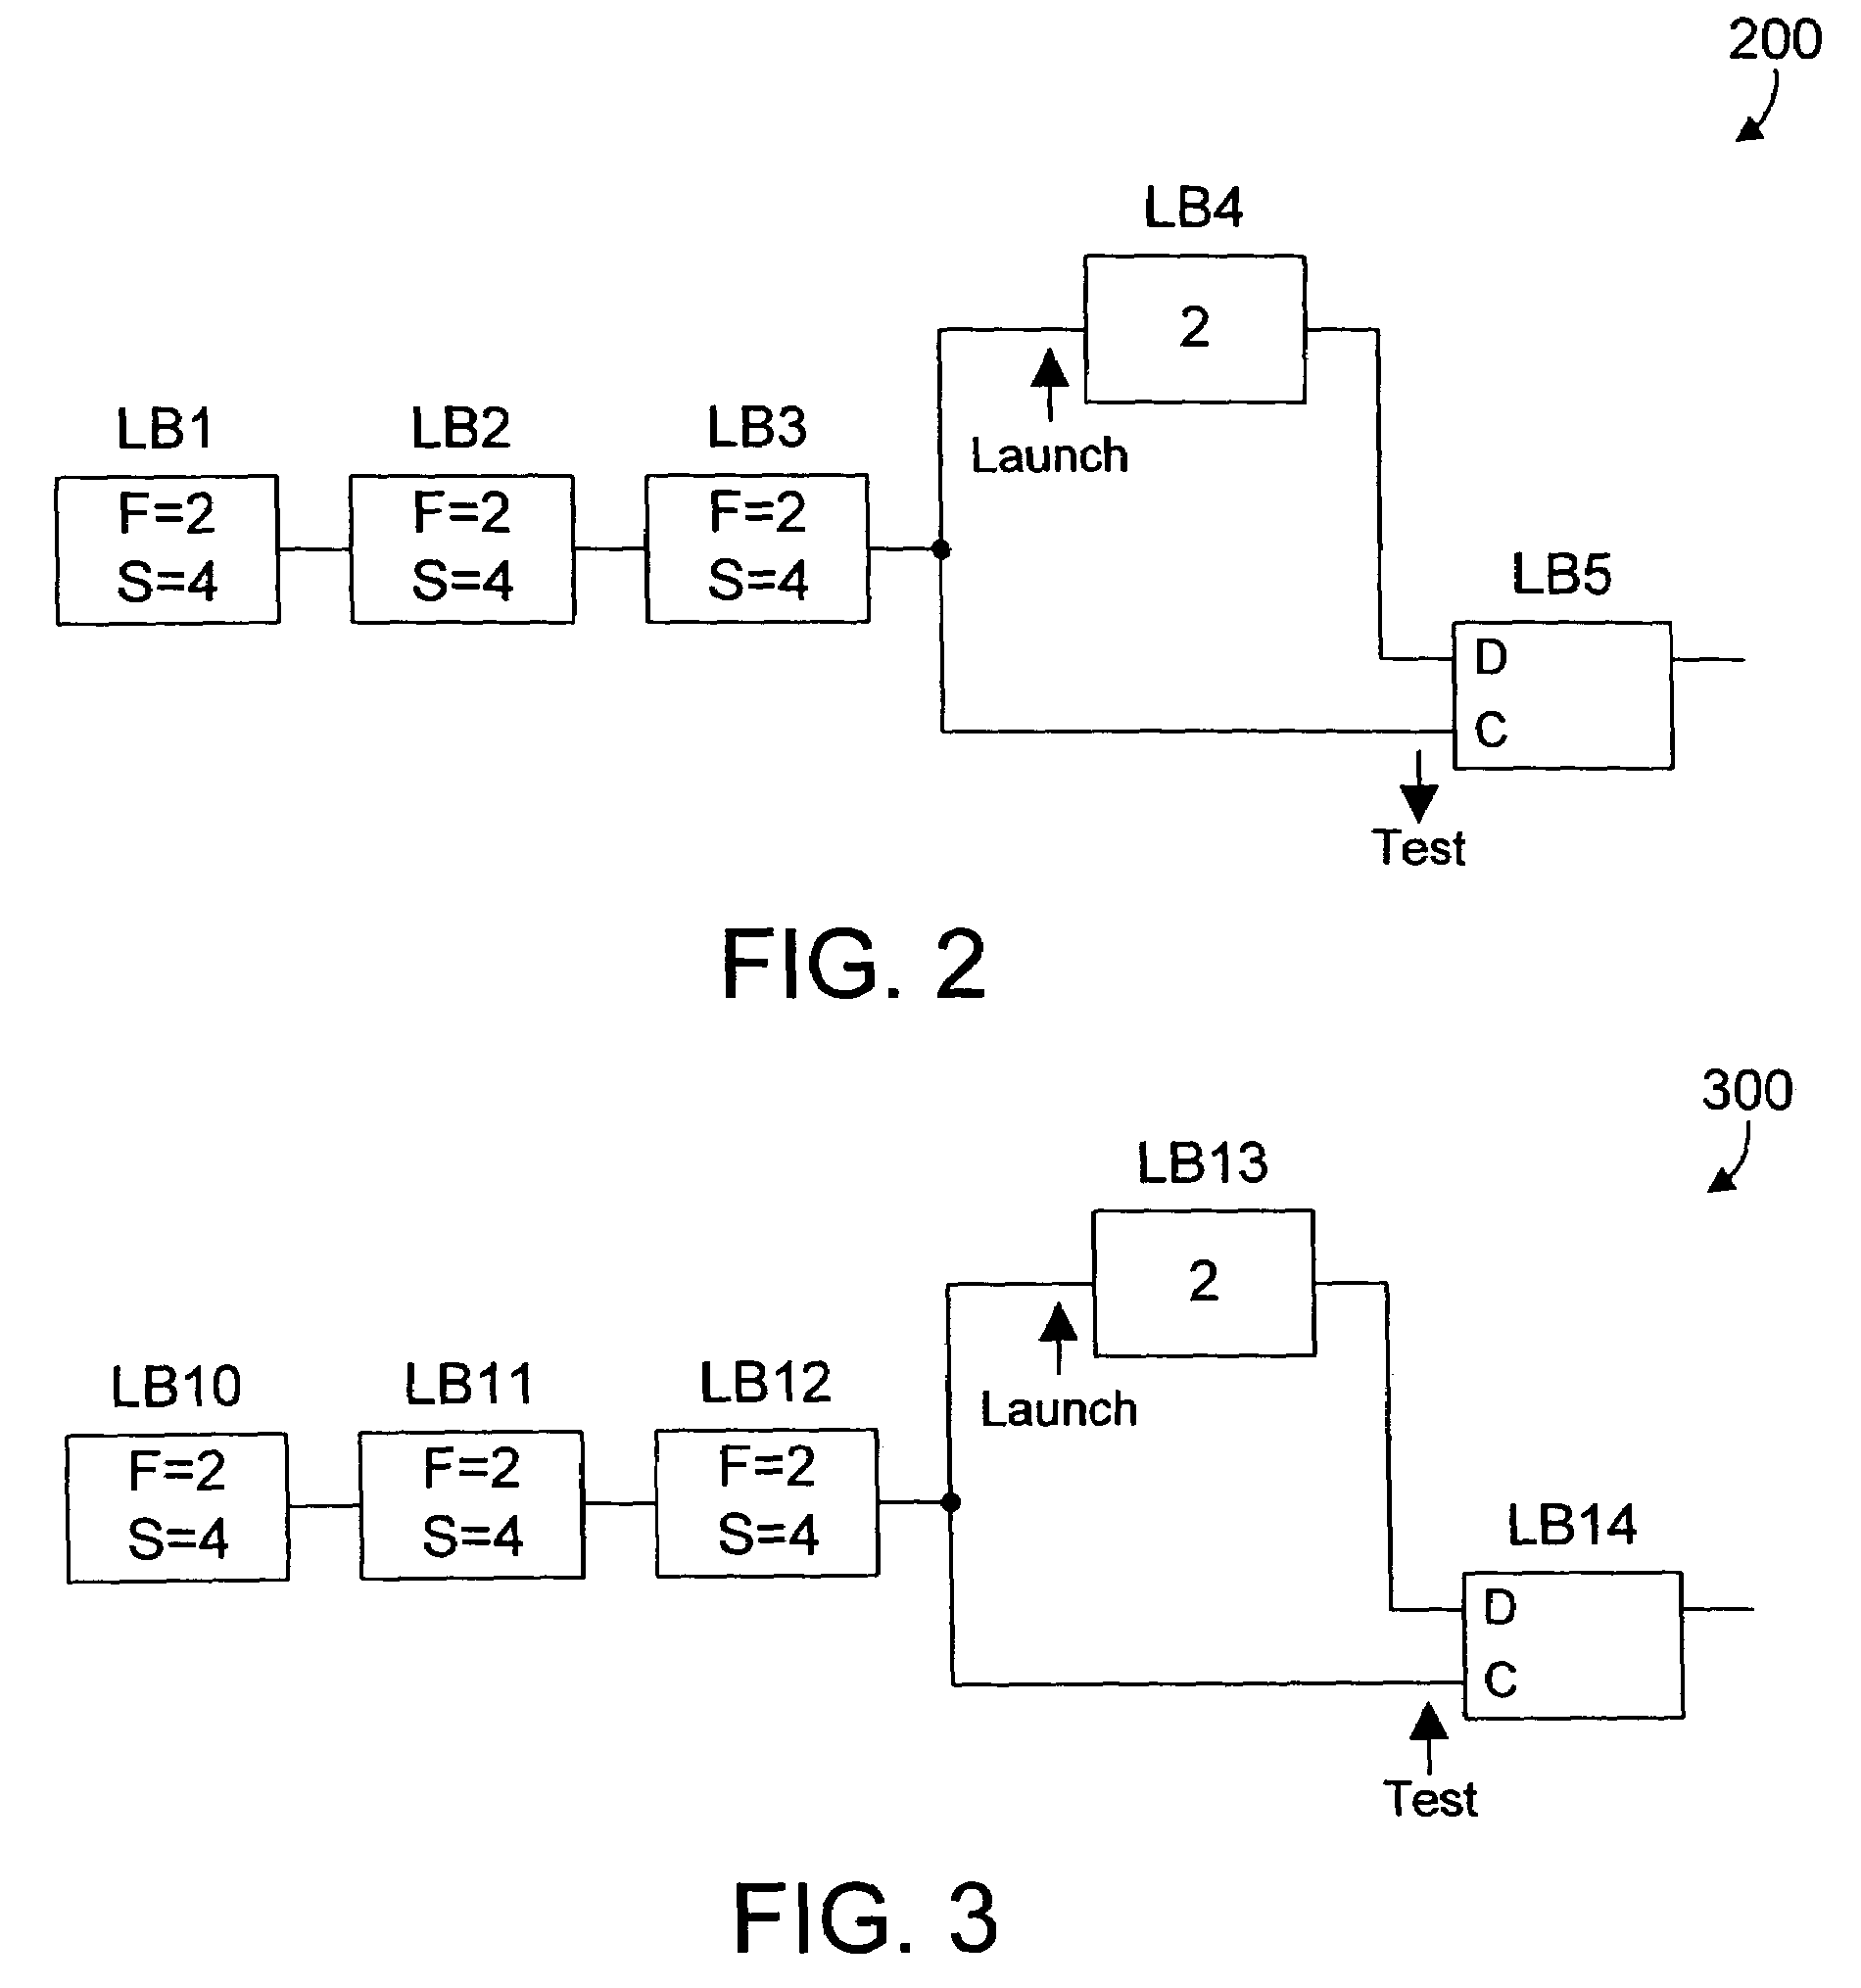 Apparatus and method for performing static timing analysis of an integrated circuit design using dummy edge modeling